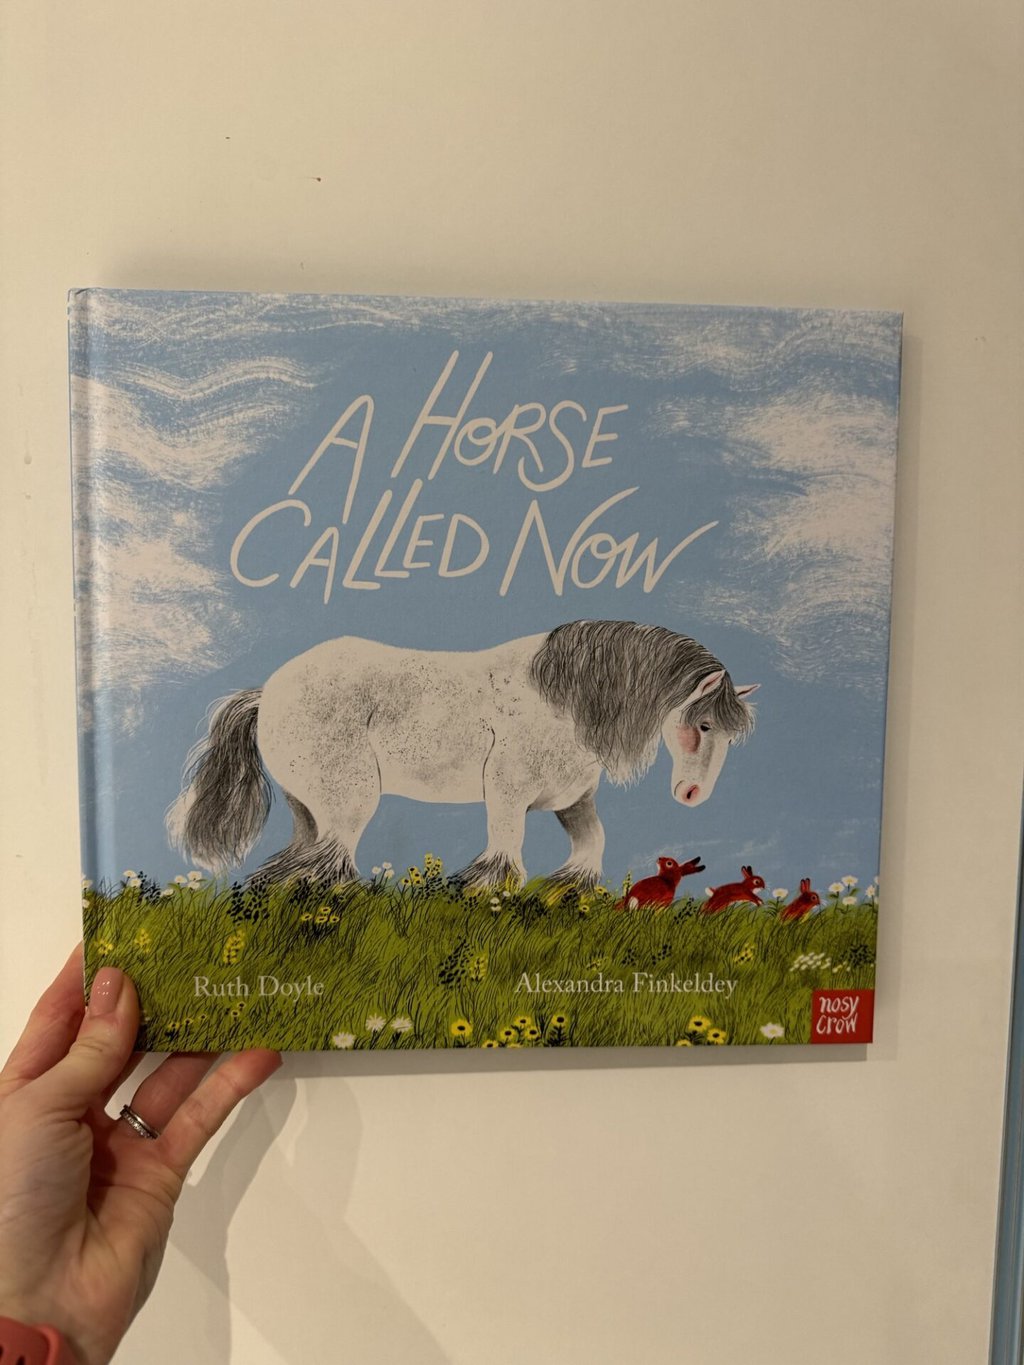 A Horse Called Now - Ruth Doyle